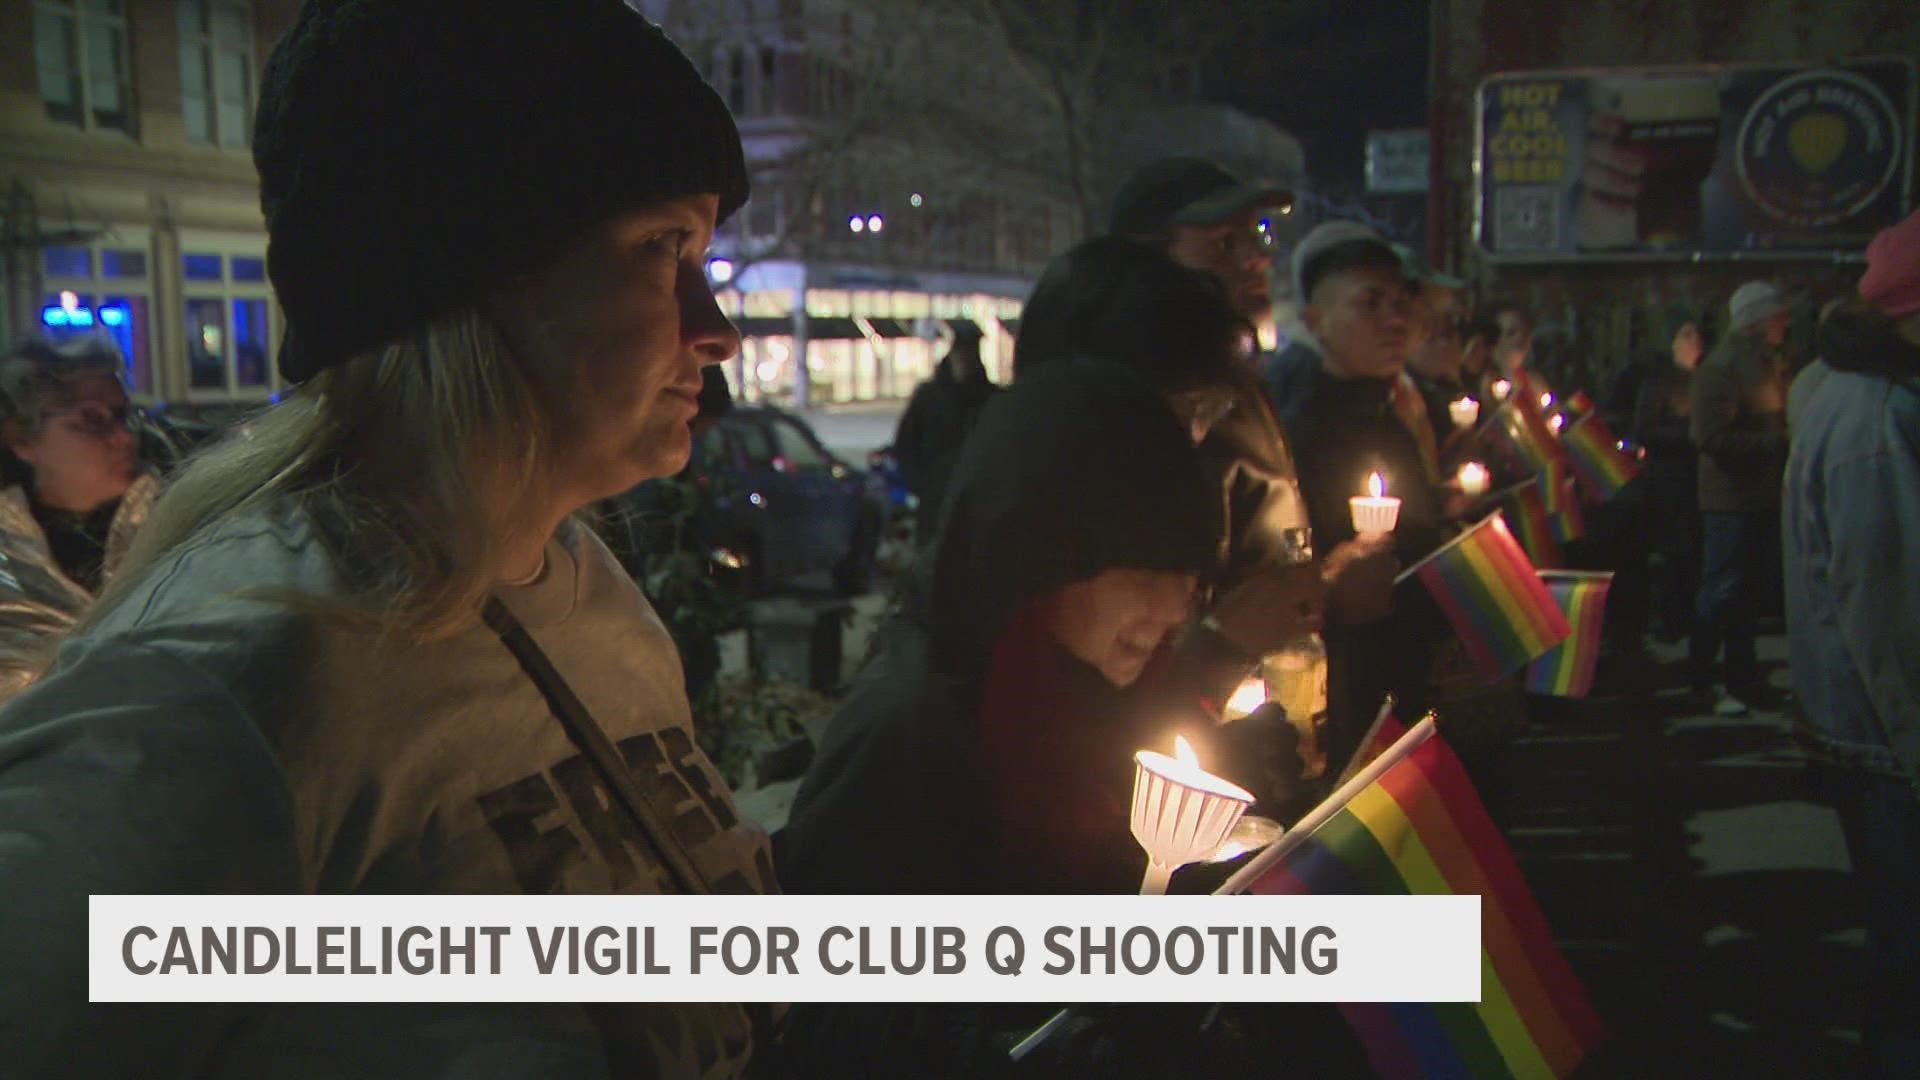 The Blazing Saddle hosted the vigil for Club Q victims at 6 p.m. on Monday.